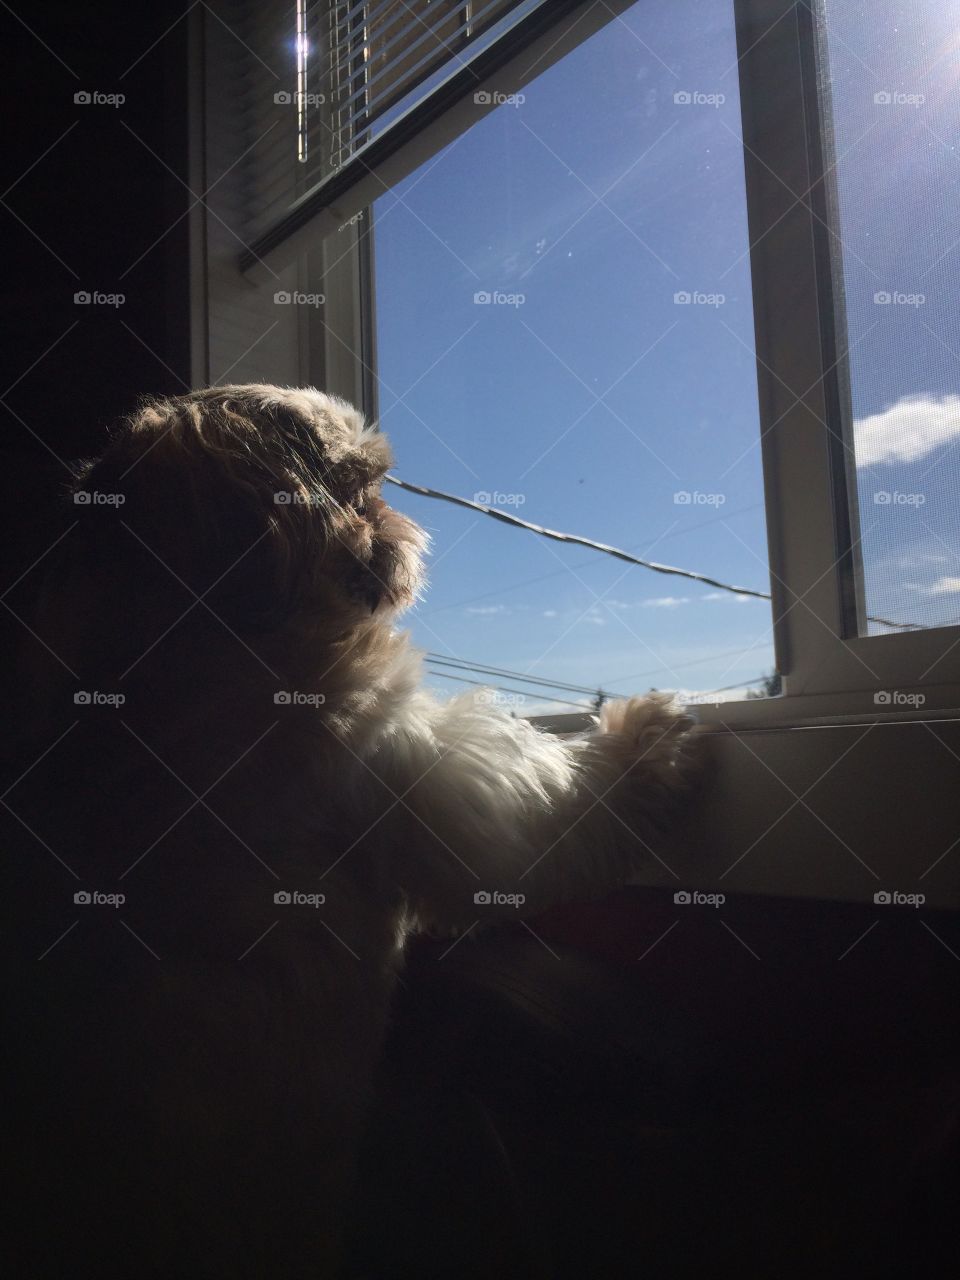 Dreaming of spring. A shih tzu stares out the window into the sunshine. 